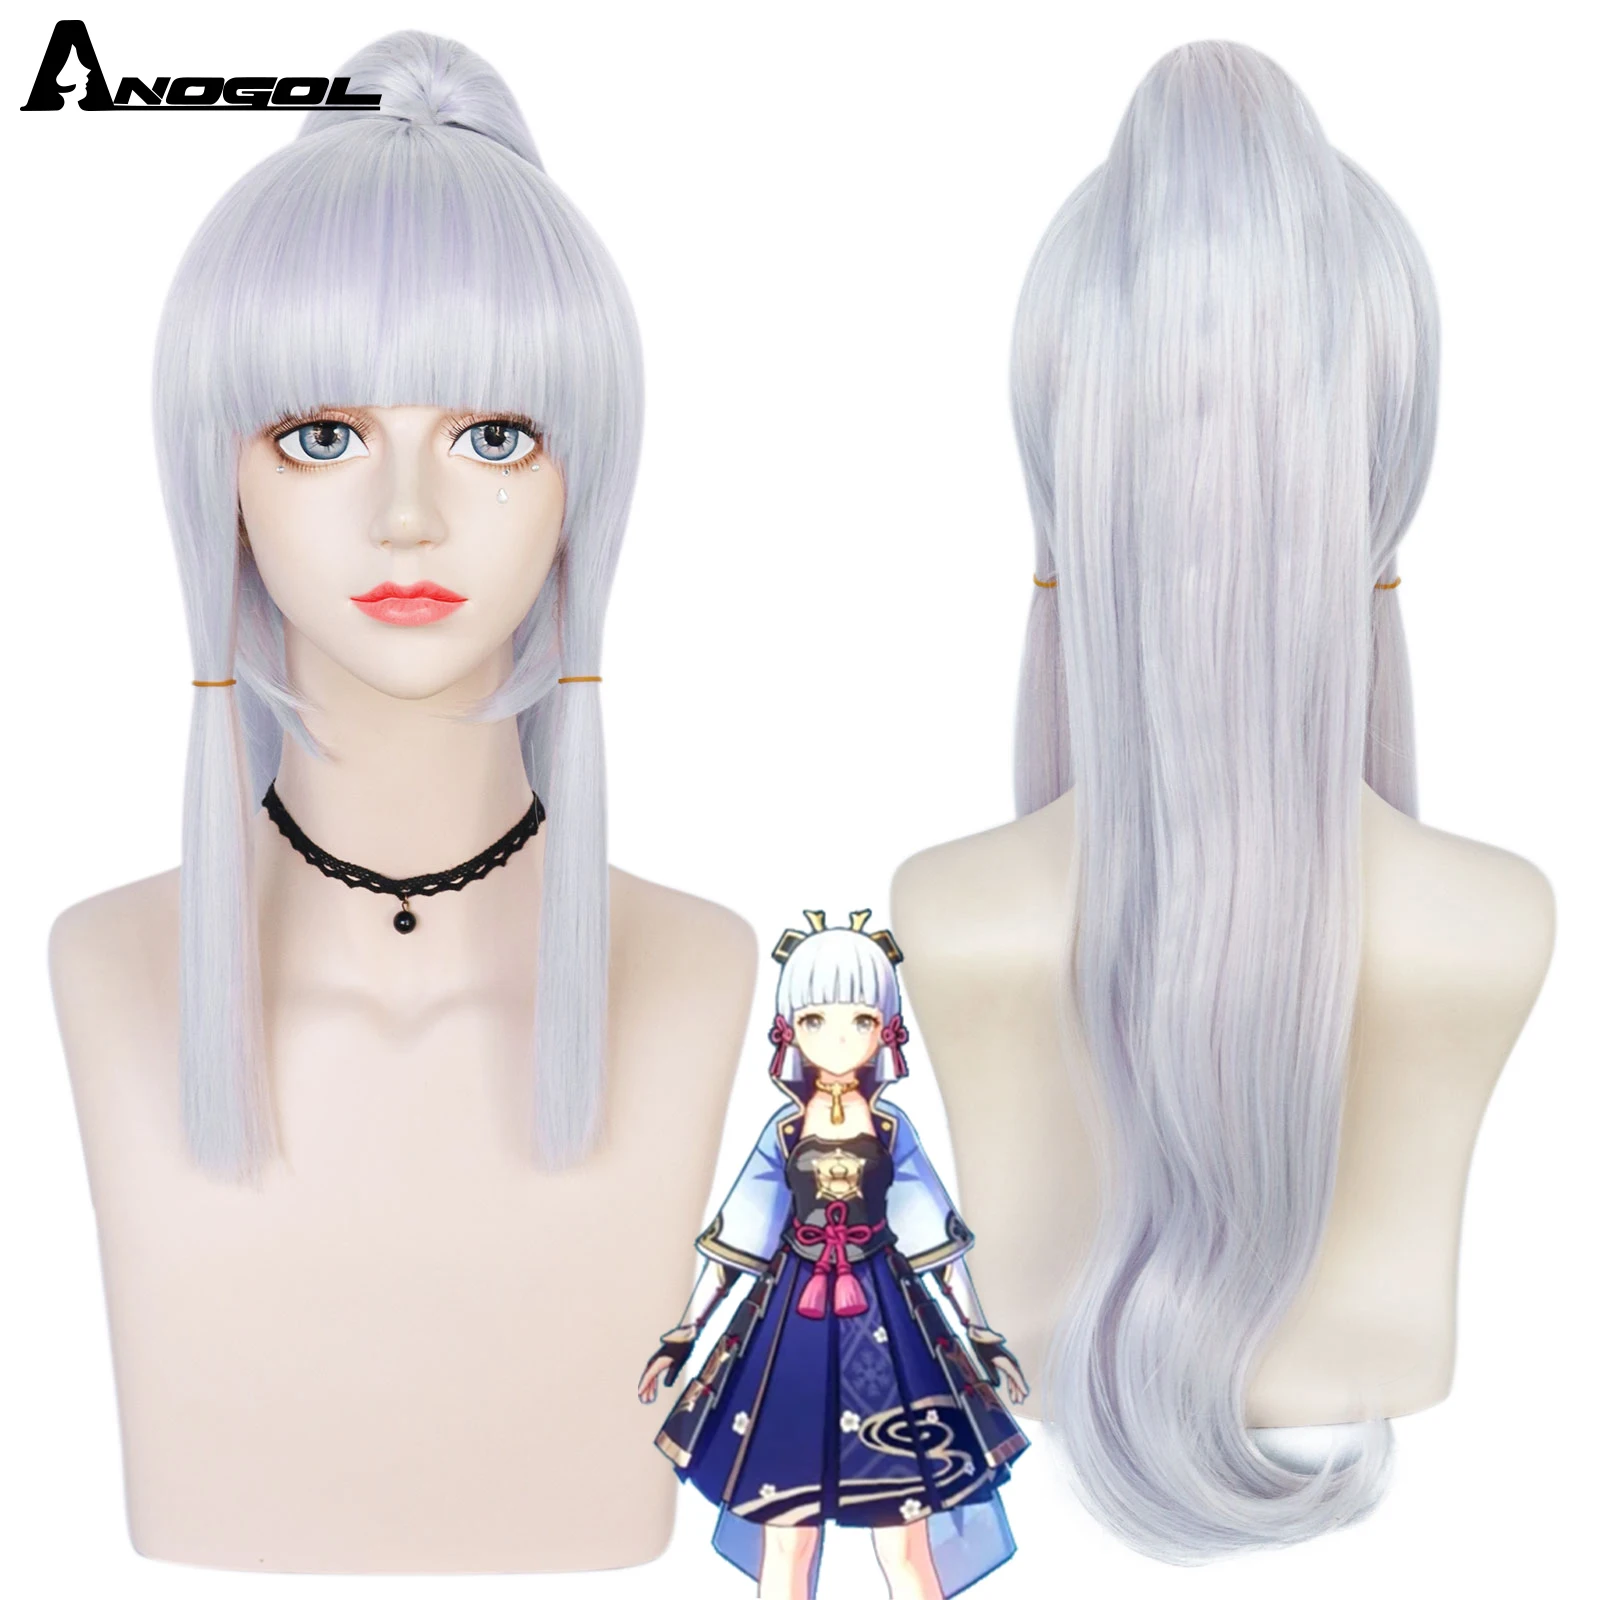 ANOGOL Ayaka Game Genshin Impact Cosplay Wig Long Silver Hair with Bangs Heat Resistant Synthetic Anime Wigs Halloween Party shangke synthetic red black blonde white lolita wigs for women long straight wig with bangs genshin impact cosplay wig